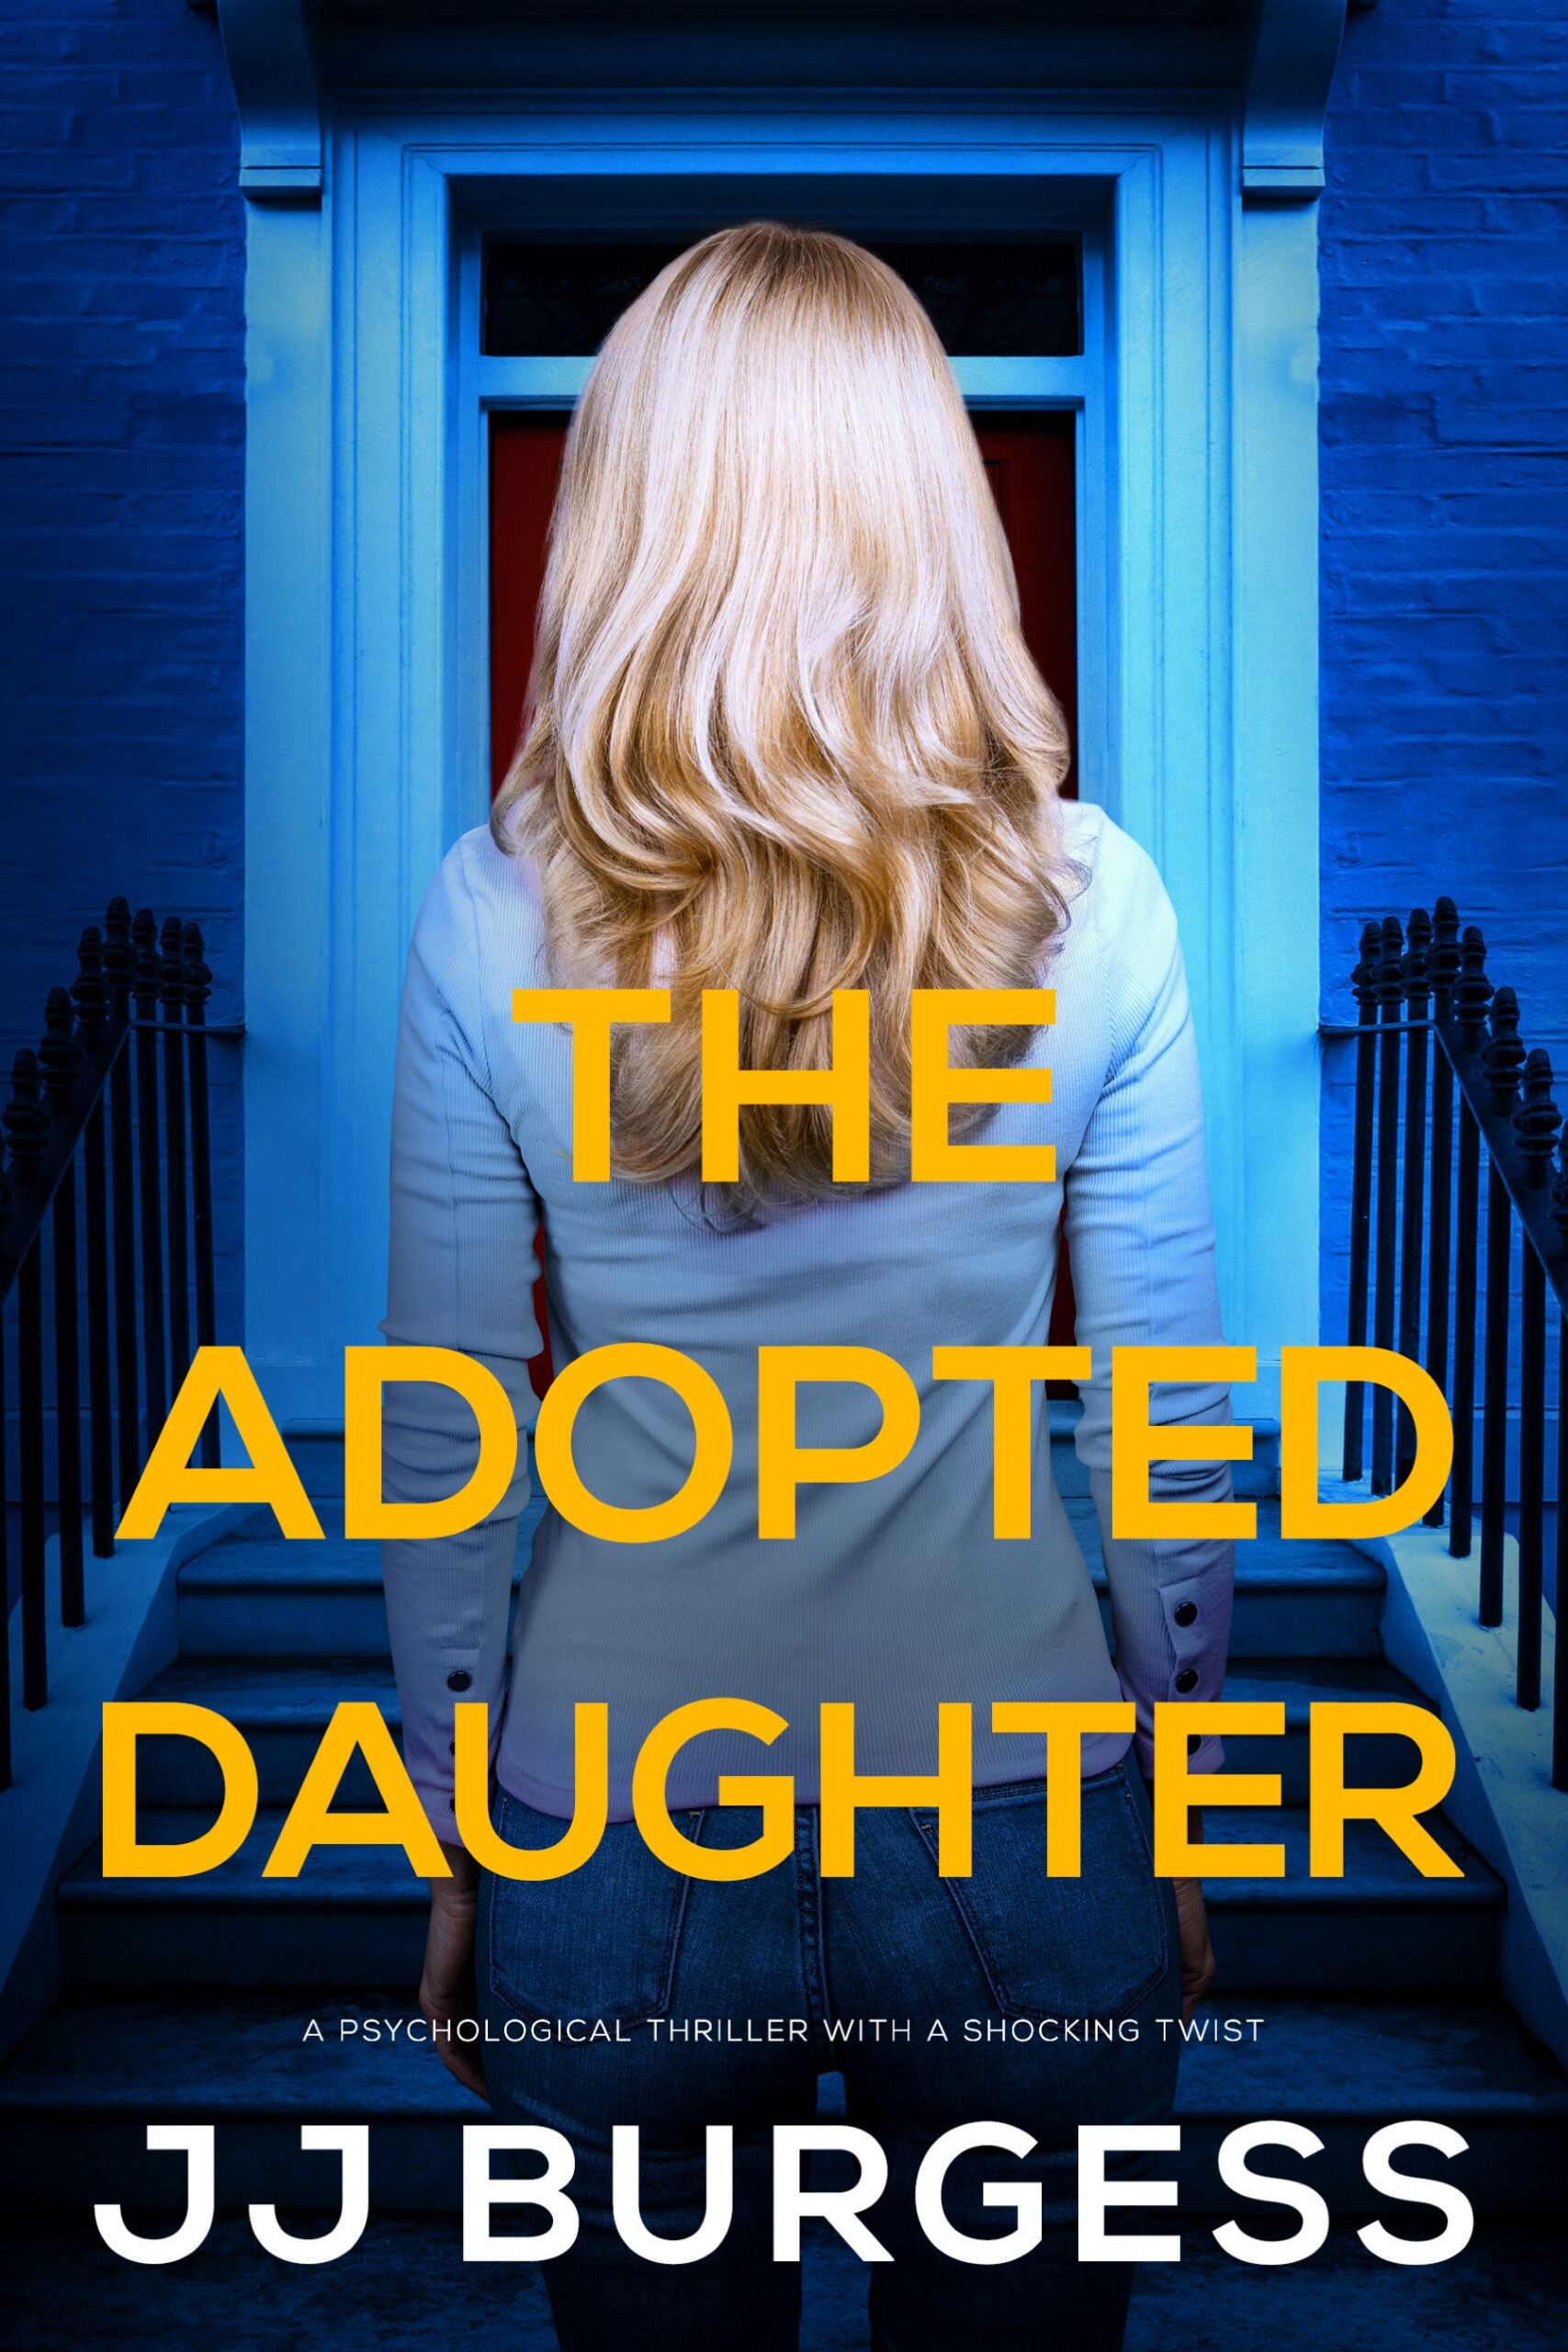 JJ BURGESS NEW RELEASE – THE ADOPTED DAUGHTER